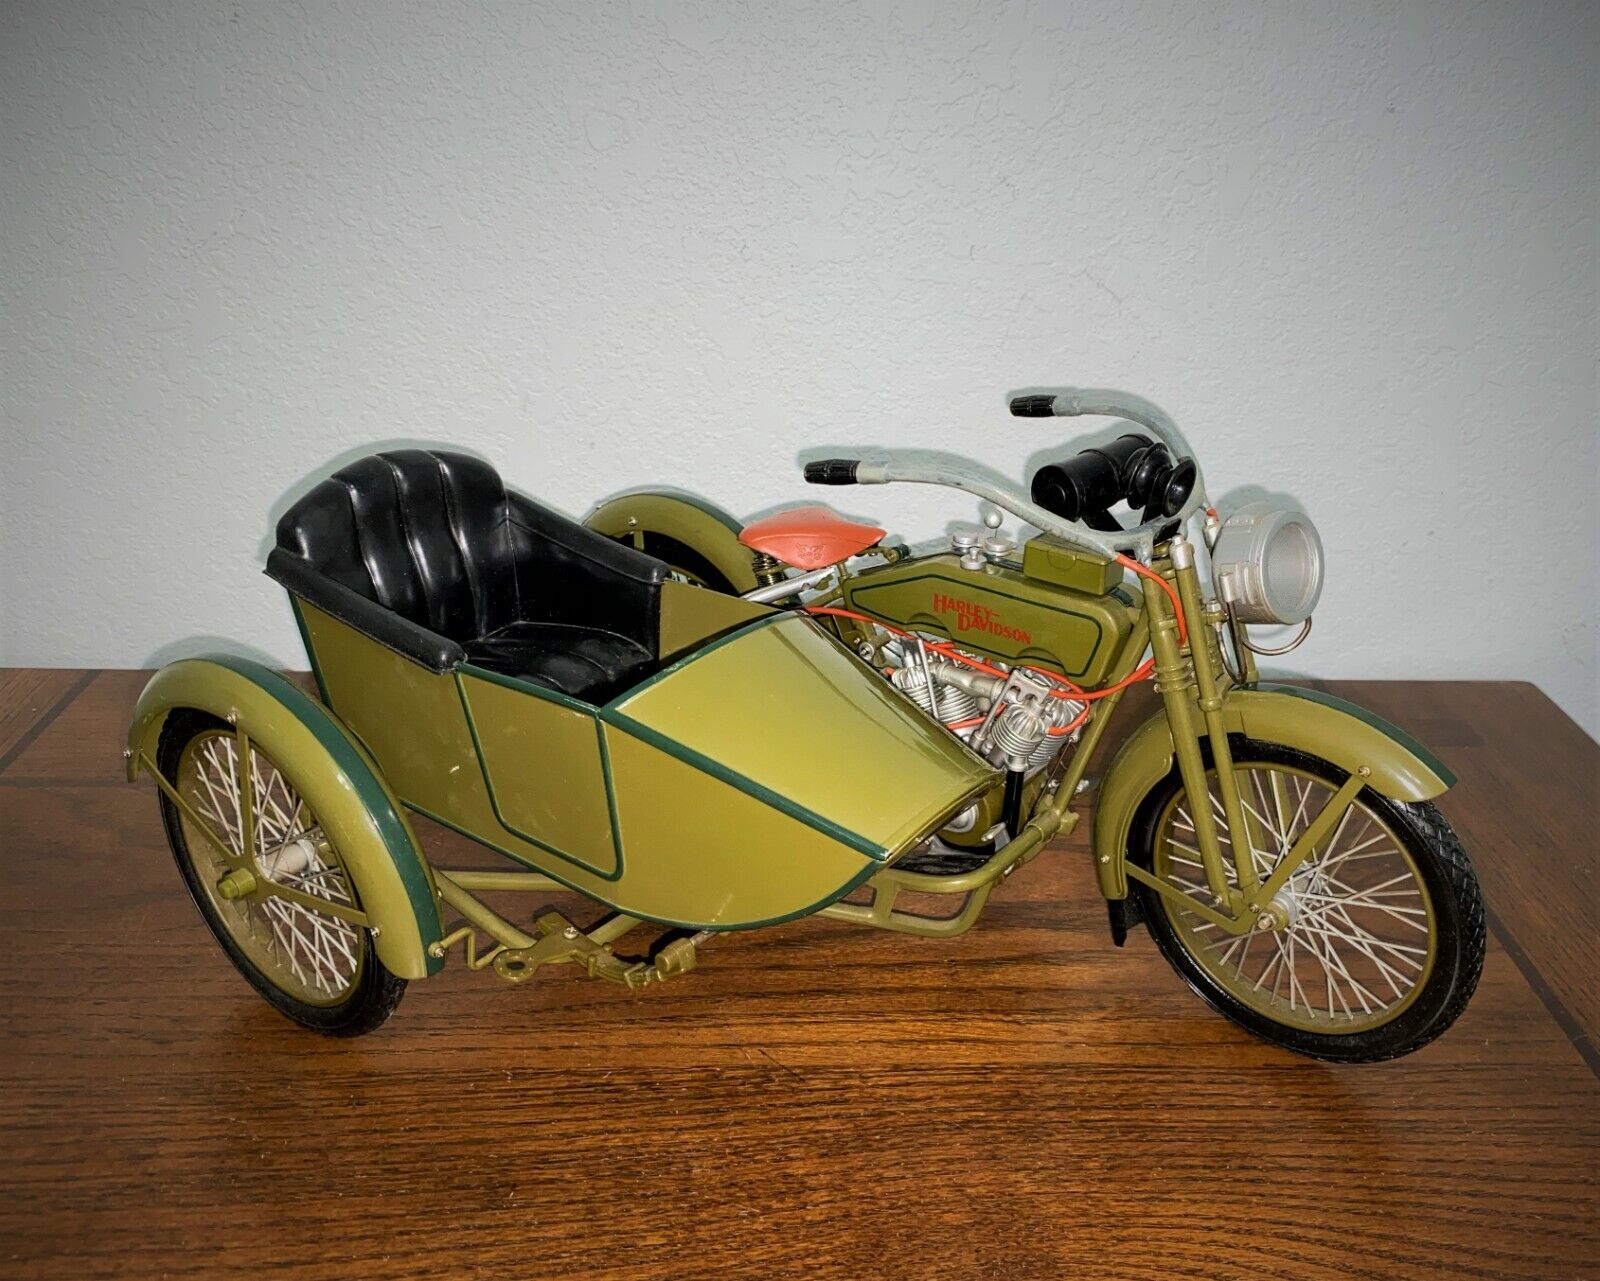 1917 Harley-Davidson Motorcycle with Sidecar 1:6 Scale - XONEX Ultimate Soldier